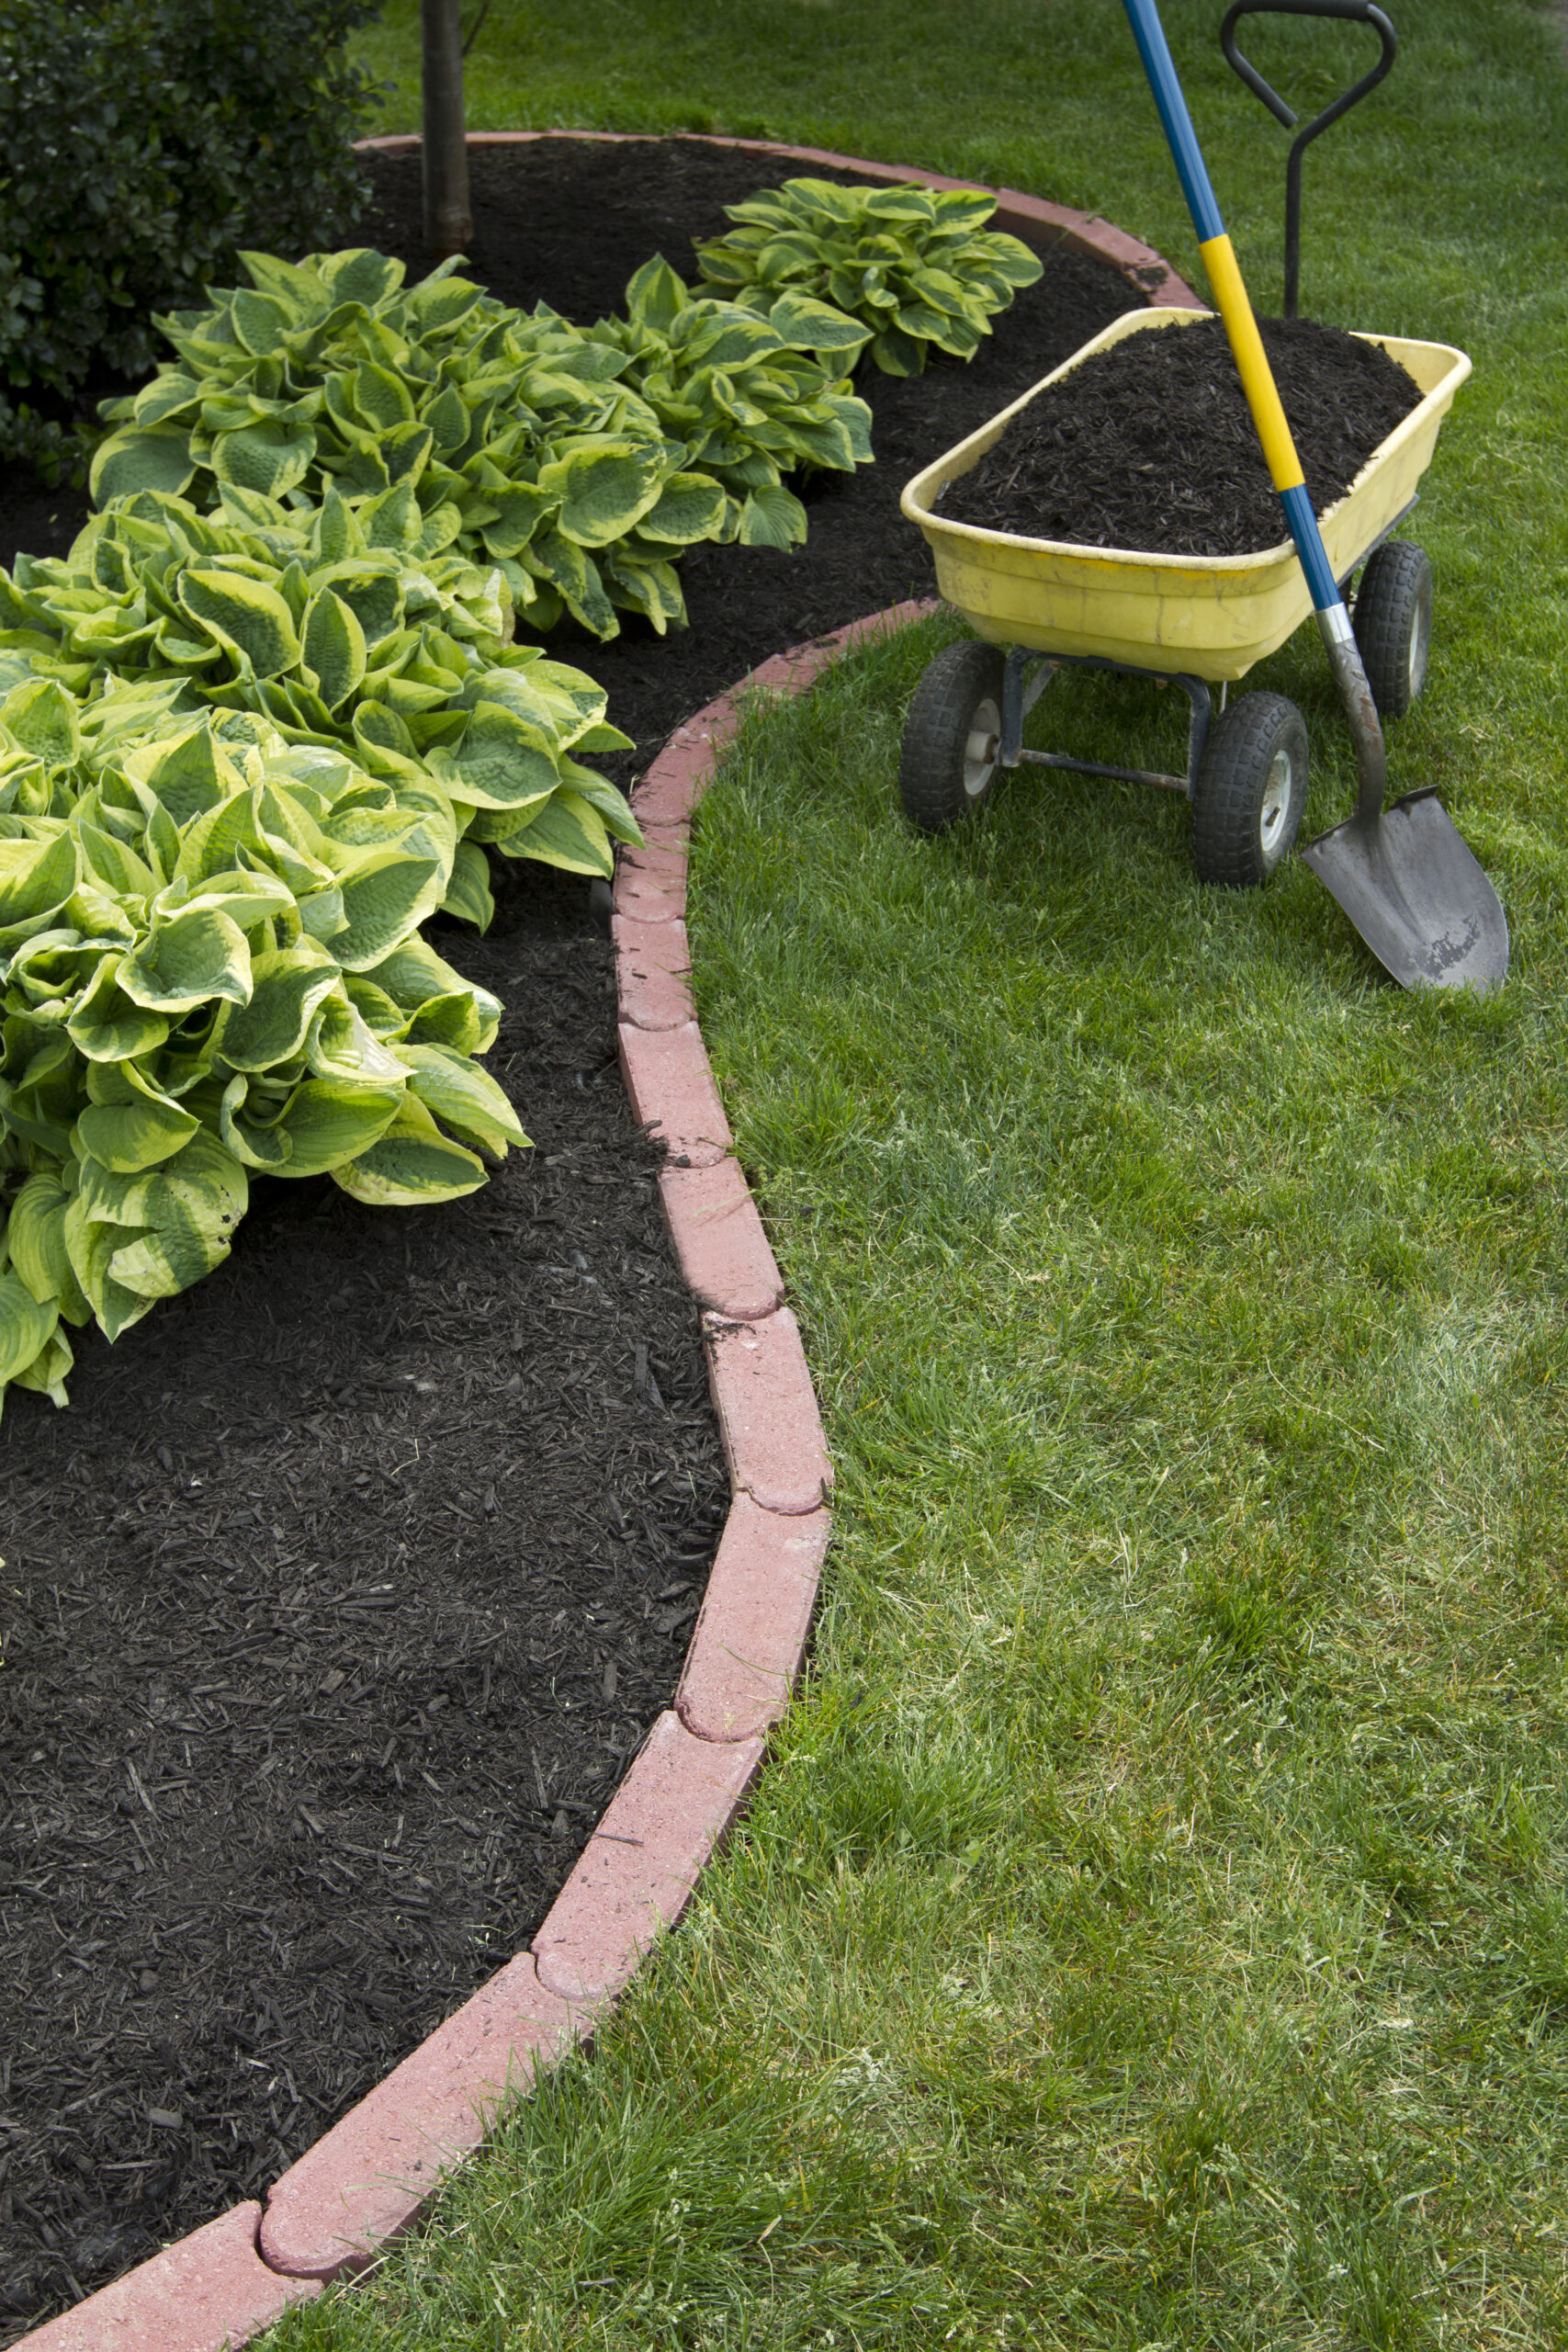 Discover expert tips for creating a serene garden with landscaping north york. Learn how to design your outdoor space, select the right plants, and create inviting seating areas.